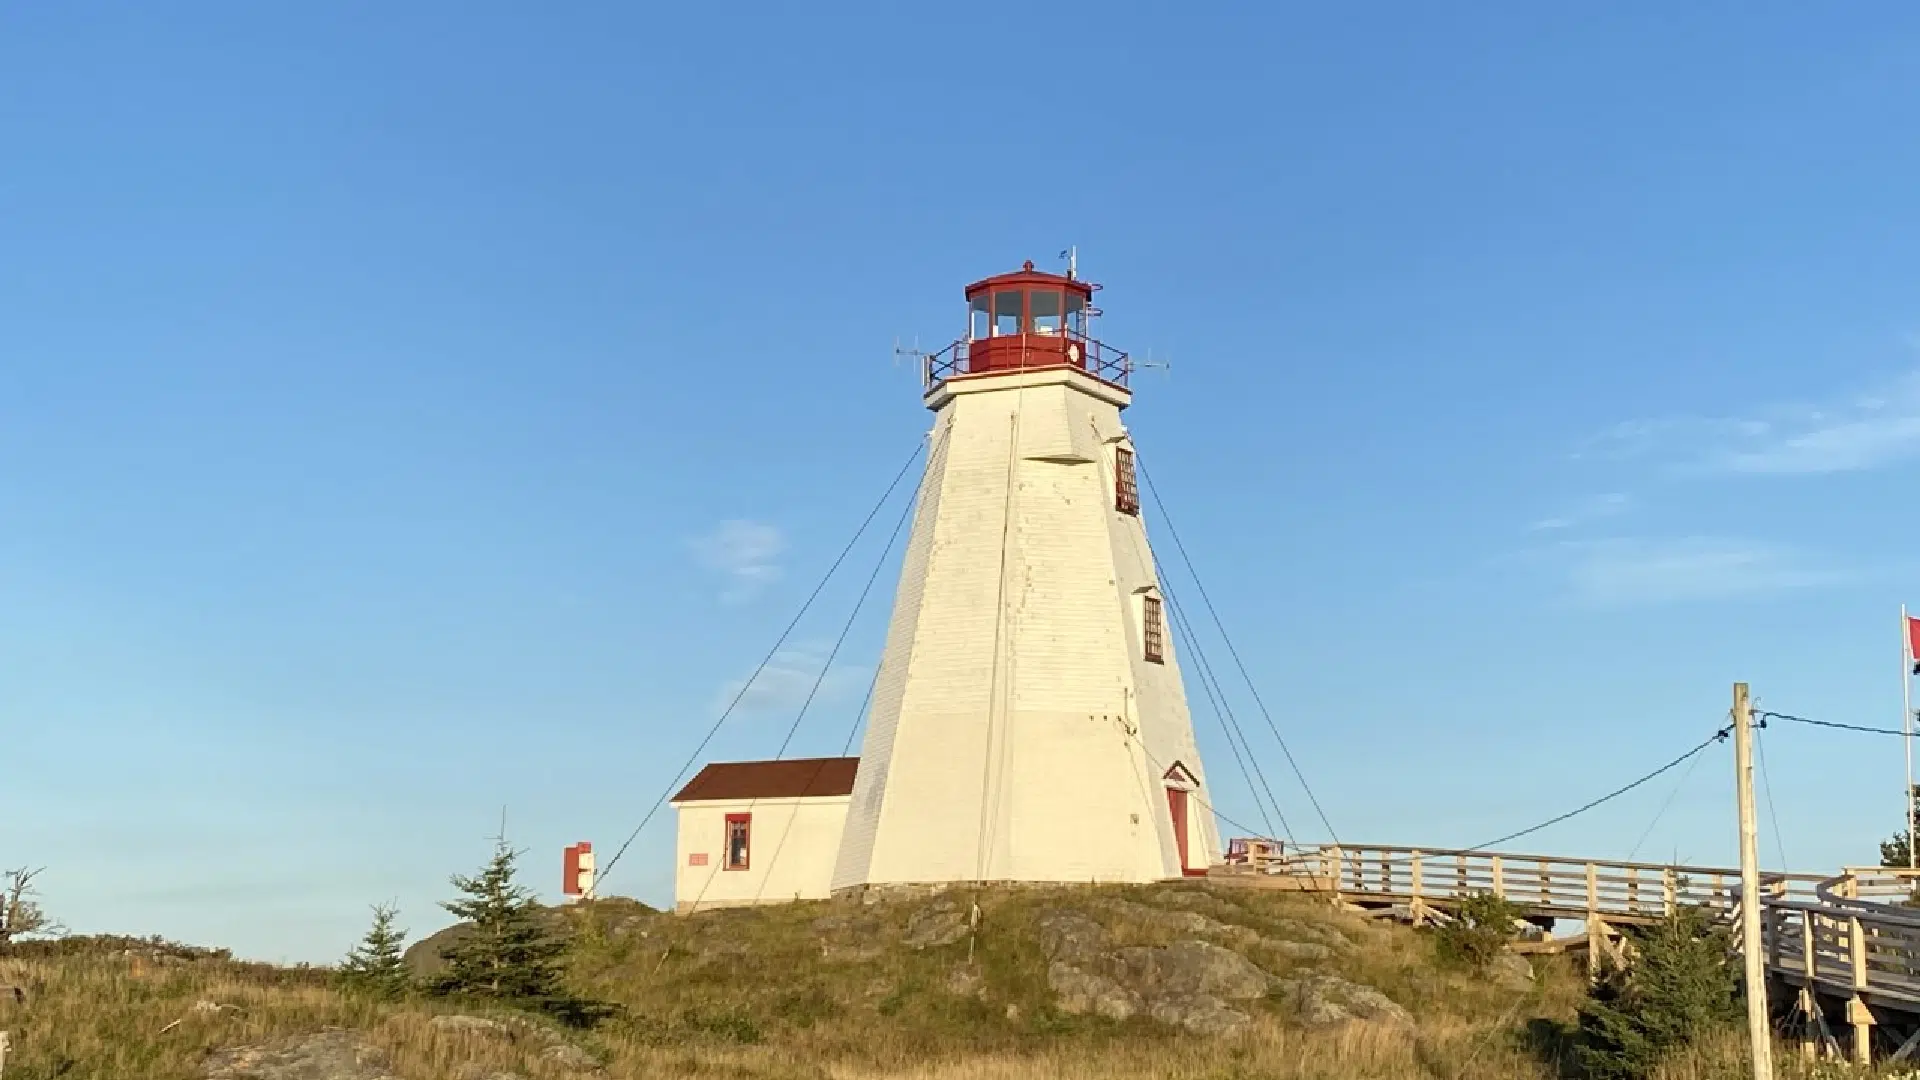 $300K Campaign To Restore Grand Manan Lighthouse